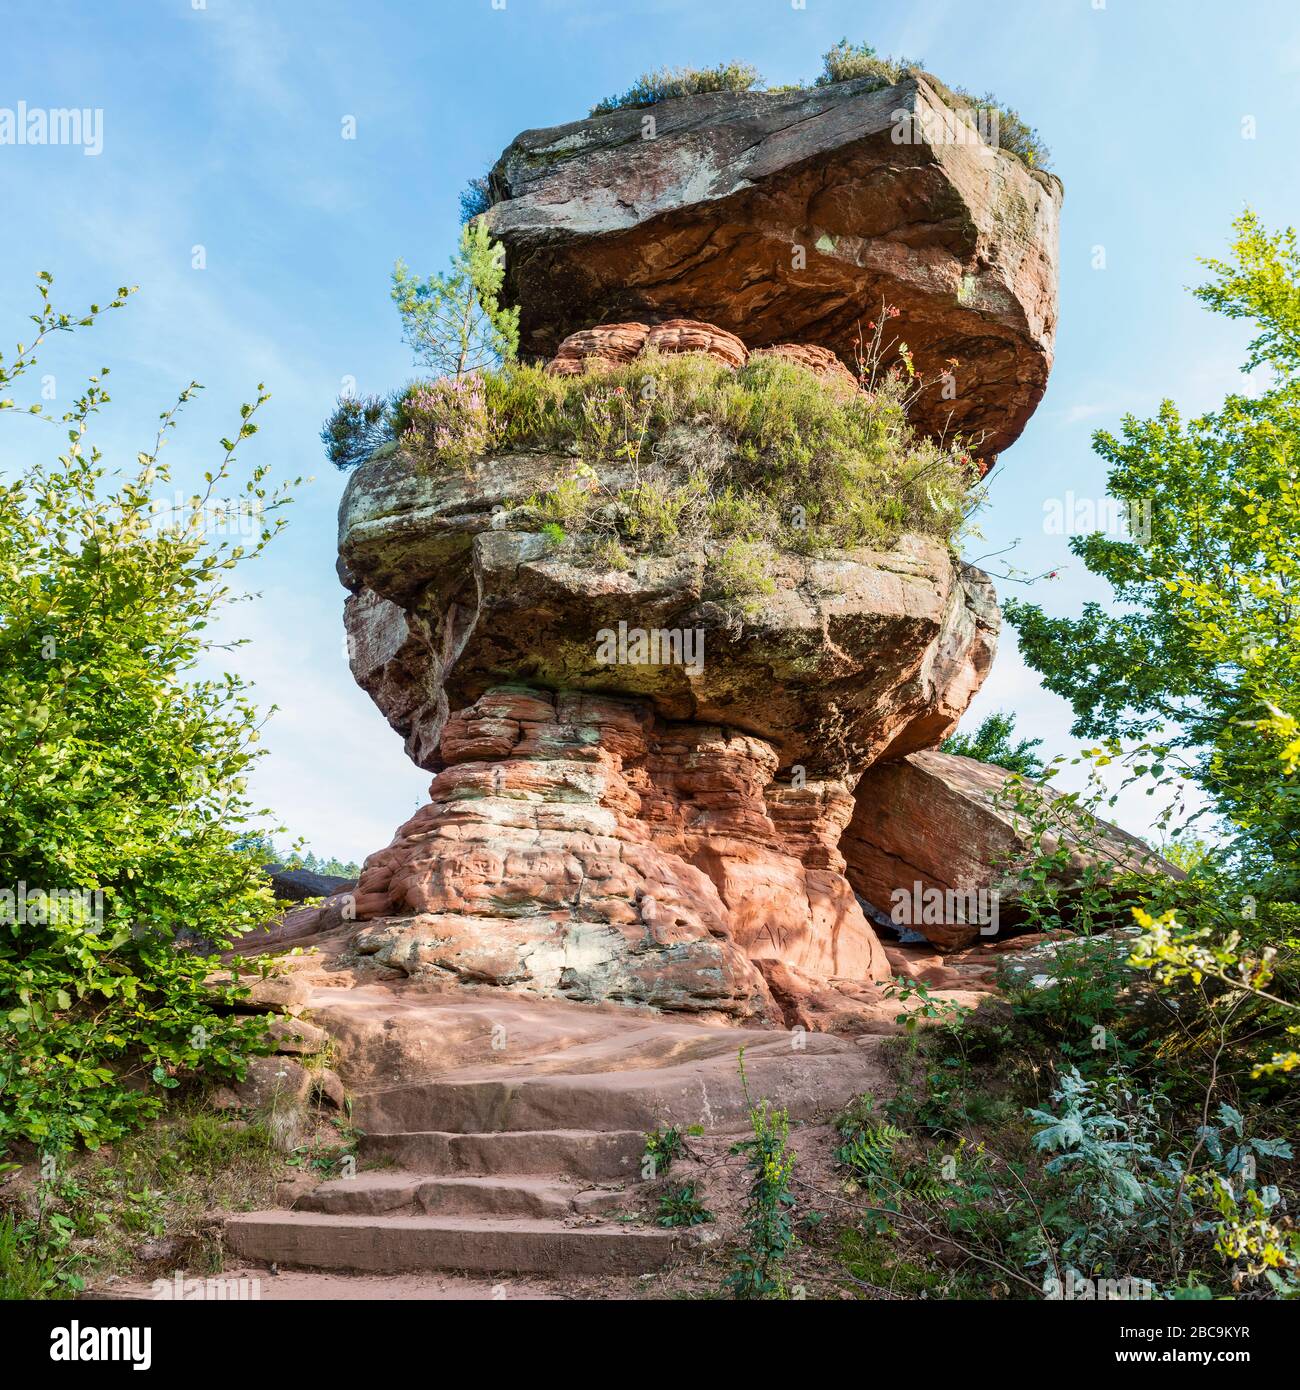 Devil's table near Hinterweidenthal in Wasgau, Palatinate highlands, natural wonder made of colored sandstone, created by erosion, north side Stock Photo